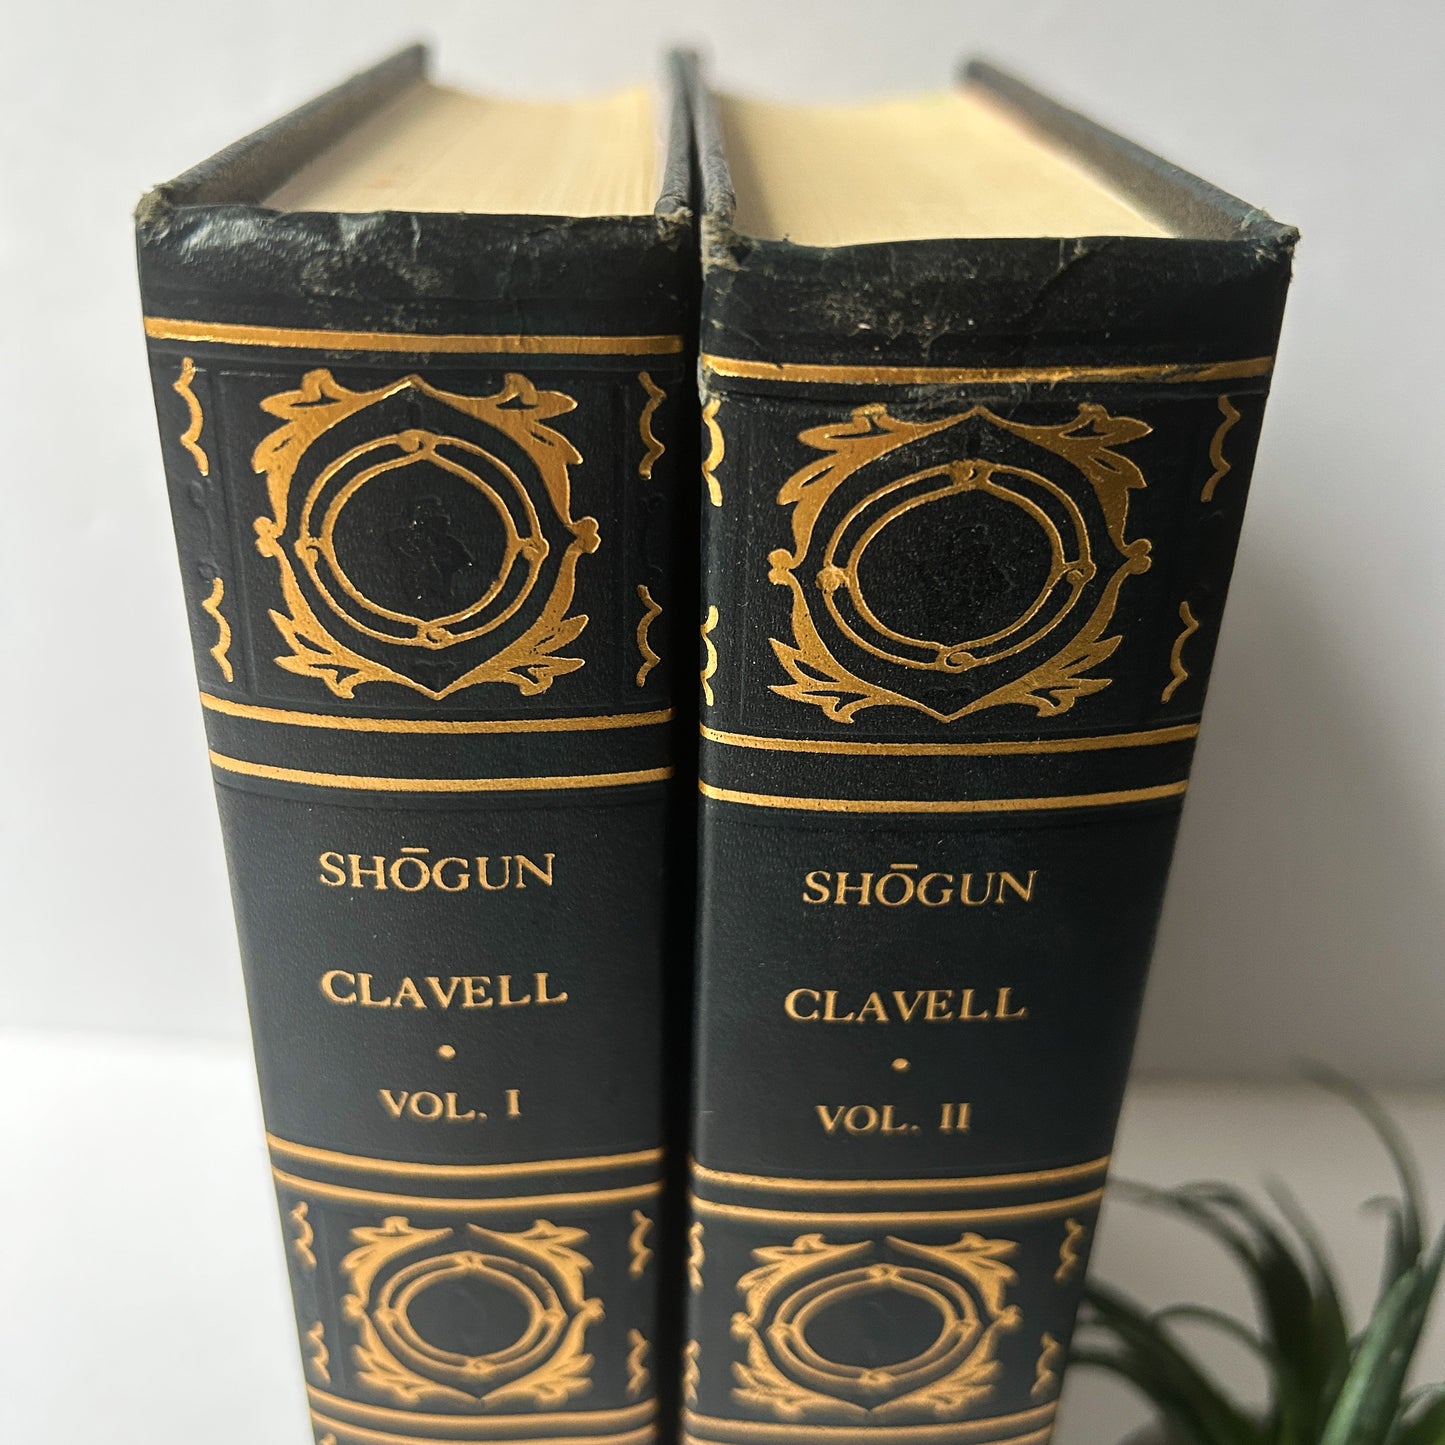 Vintage Shogun book set, by James Clavell, Volume I & II, International Collectors Library Editions